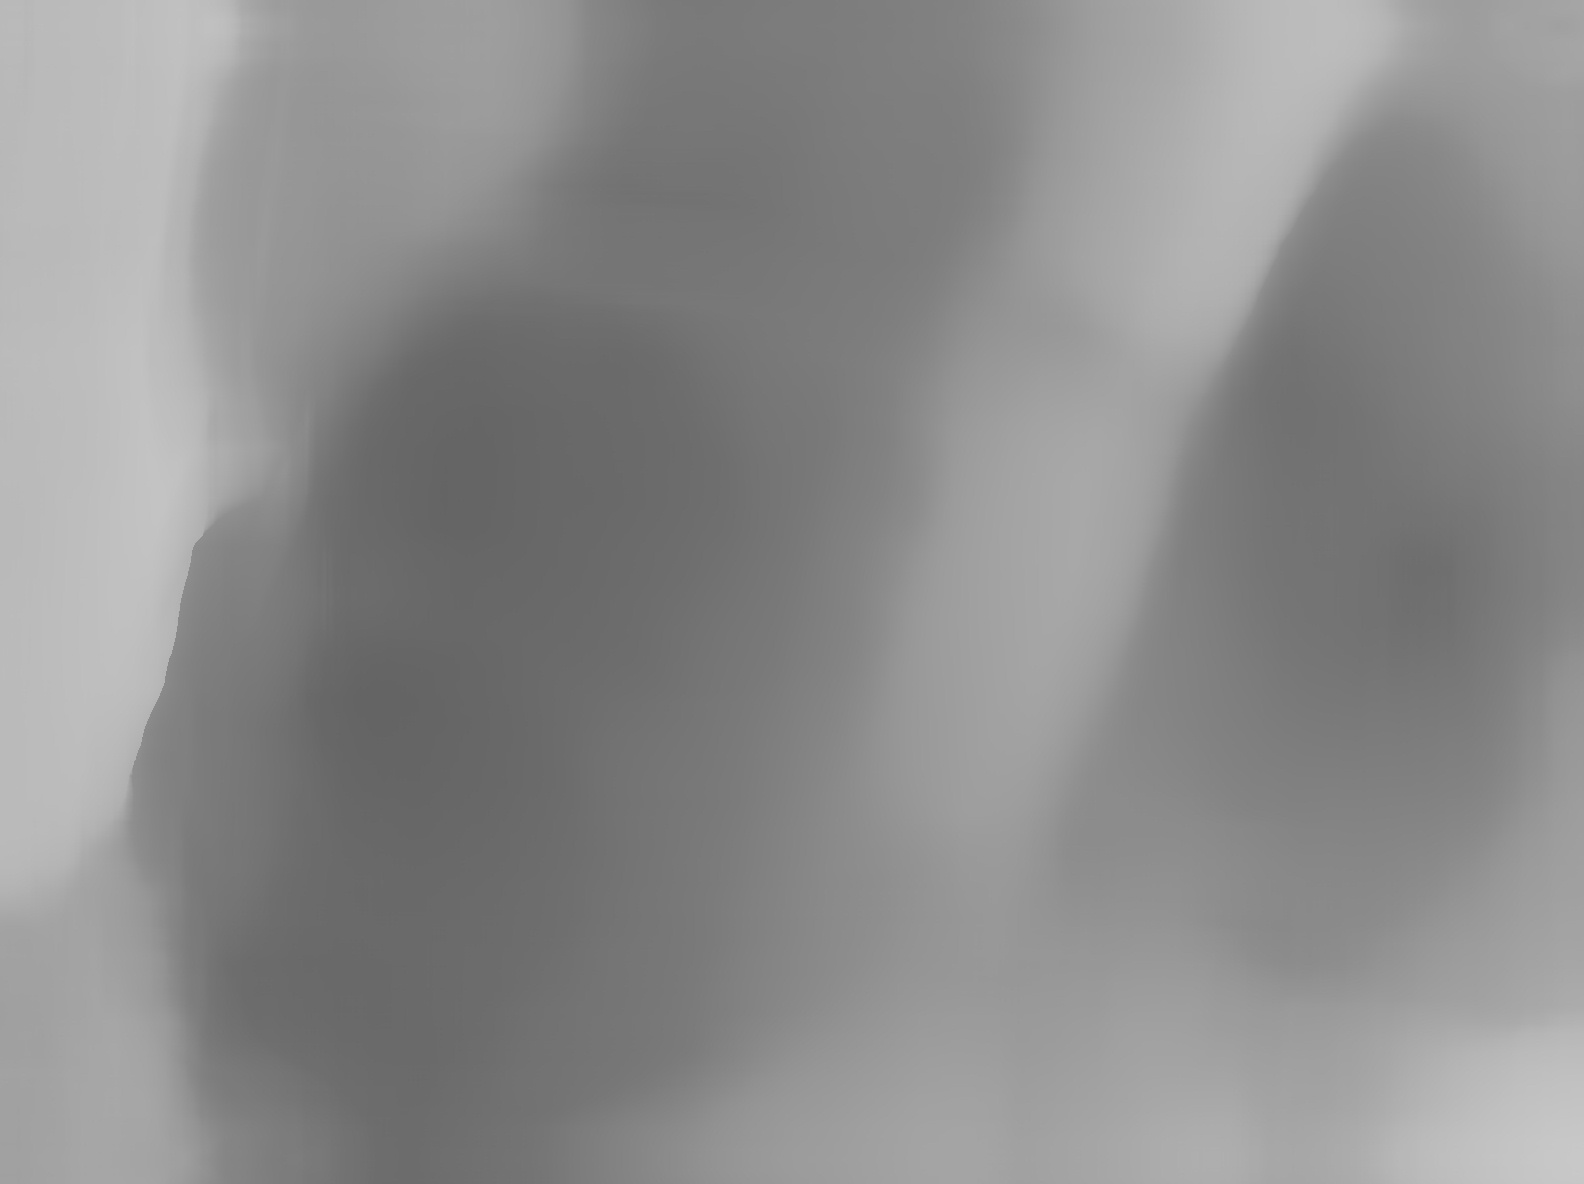 Nasa's Mars rover Curiosity acquired this image using its Mars Hand Lens Imager (MAHLI) on Sol 2943